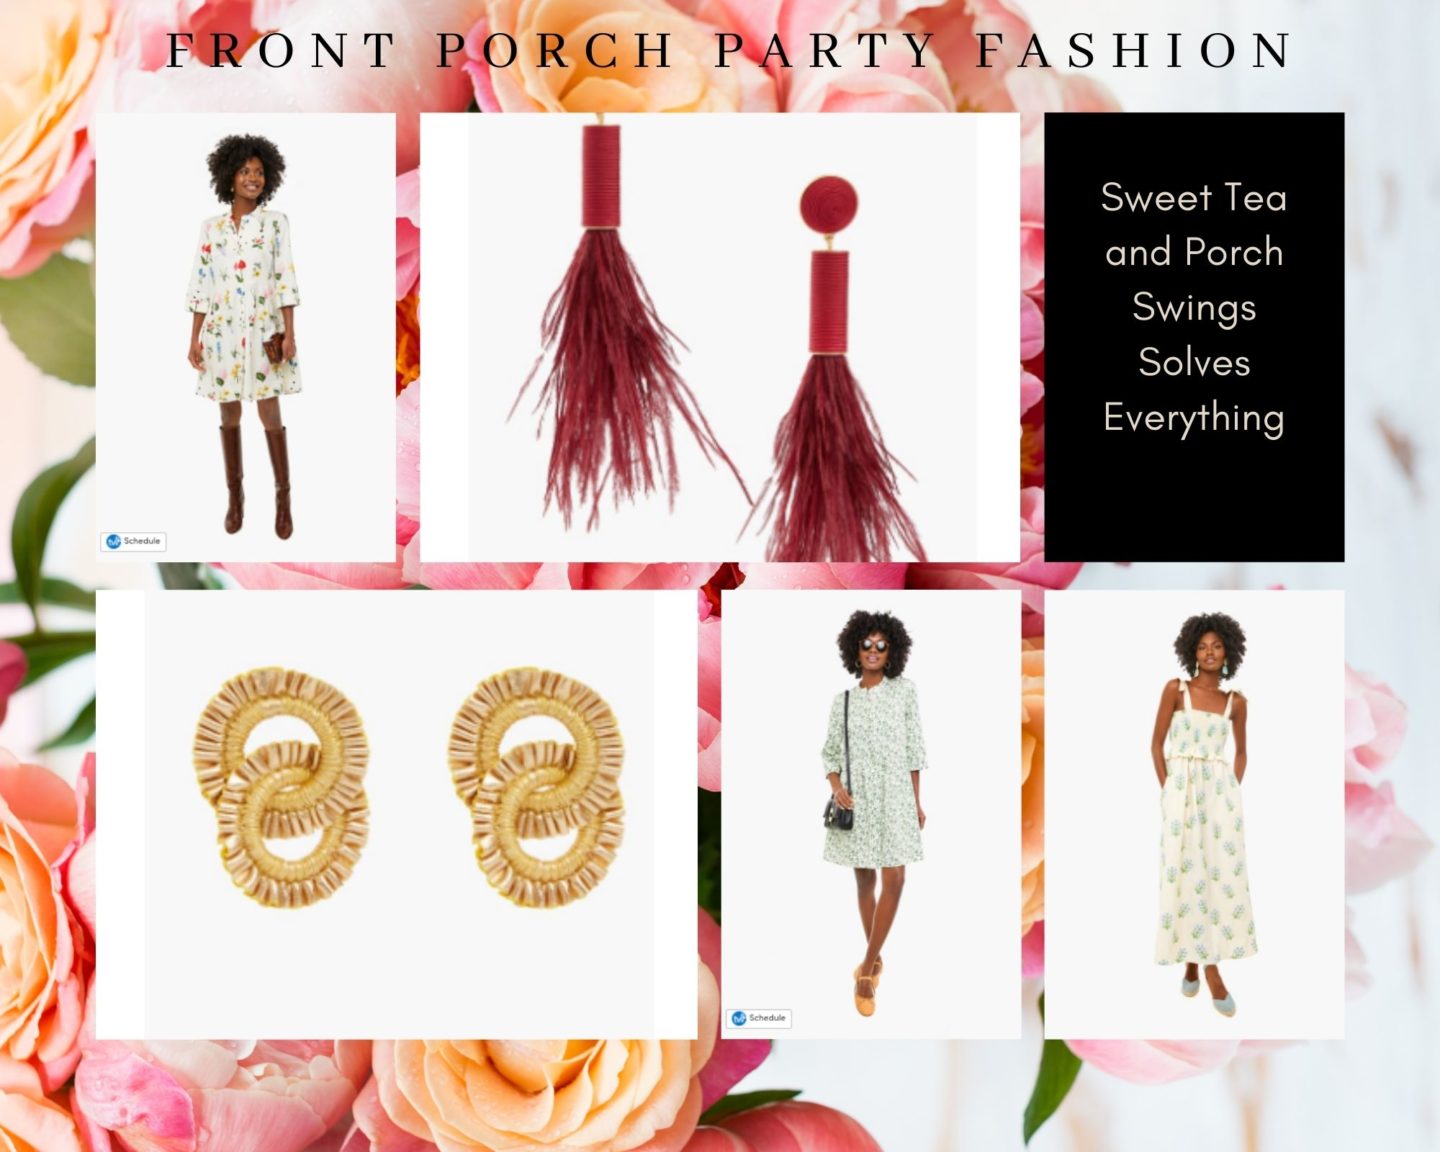 How to Dress for a Front Porch Party